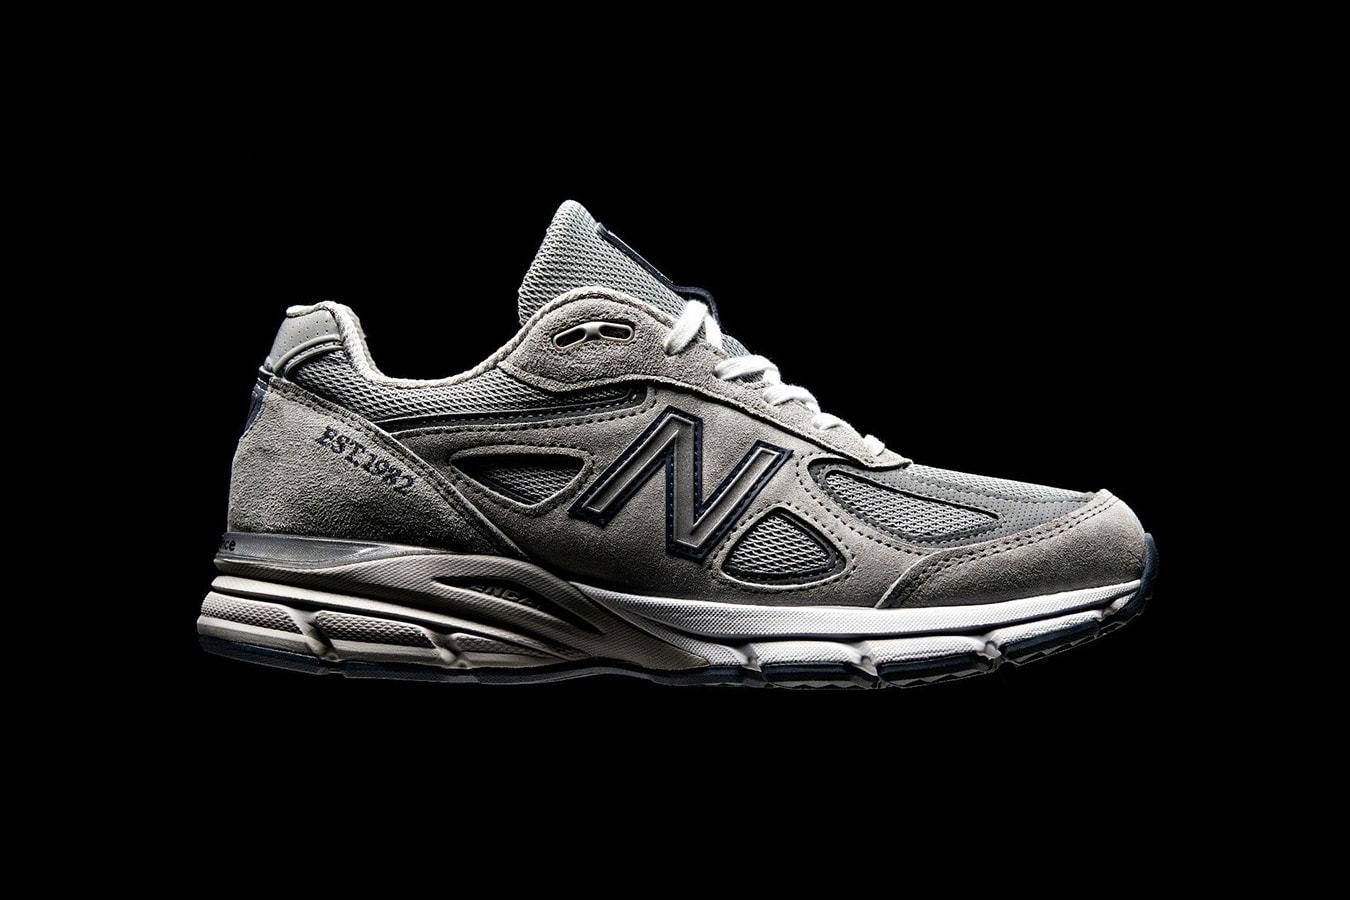 New Balance 990v4 EST 1982 Made in USA america 100 usd dollars original price april 14 2018 release date info drop sneakers shoes footwear 1500 pairs limited exclusive special edition